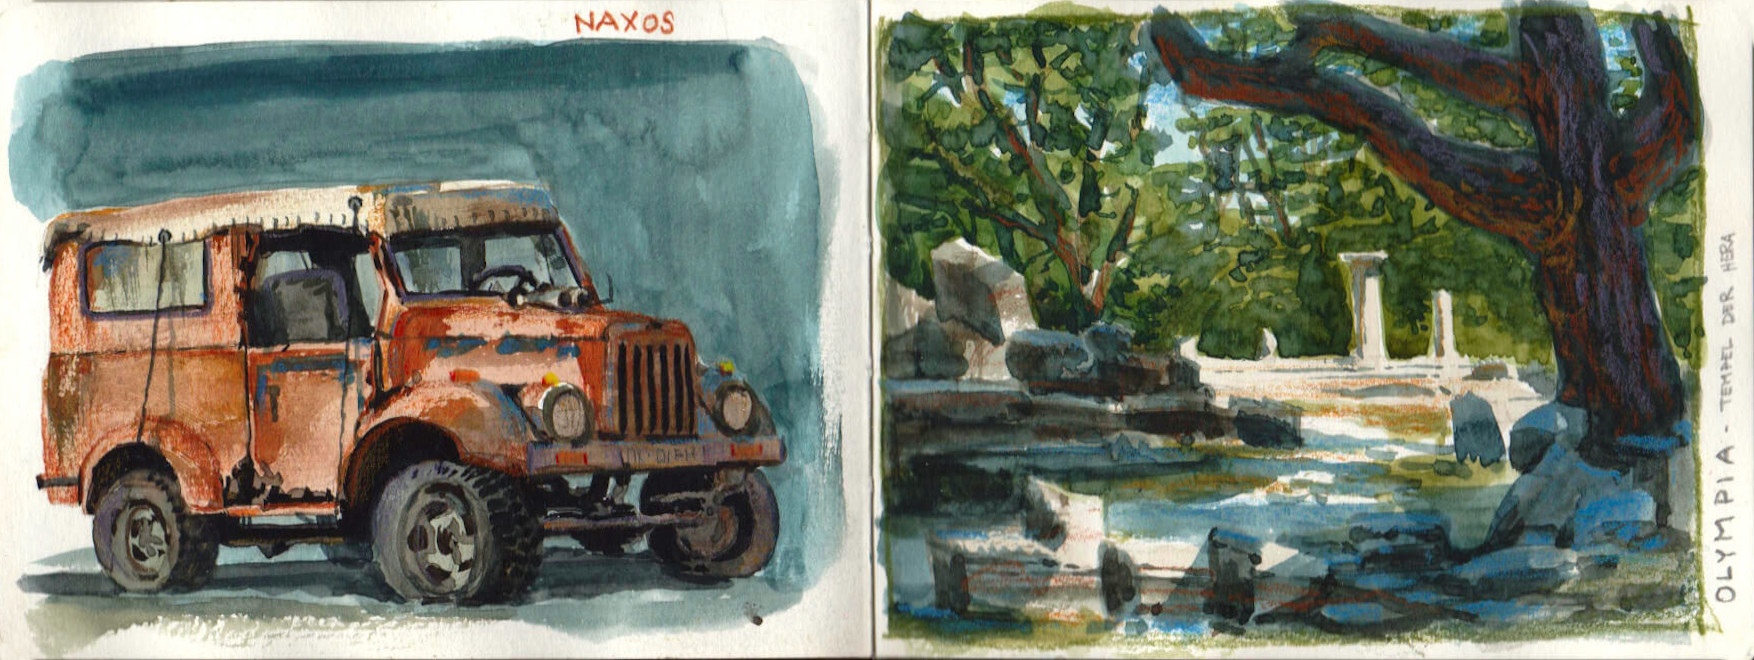 old jeep and ruins at Olympia